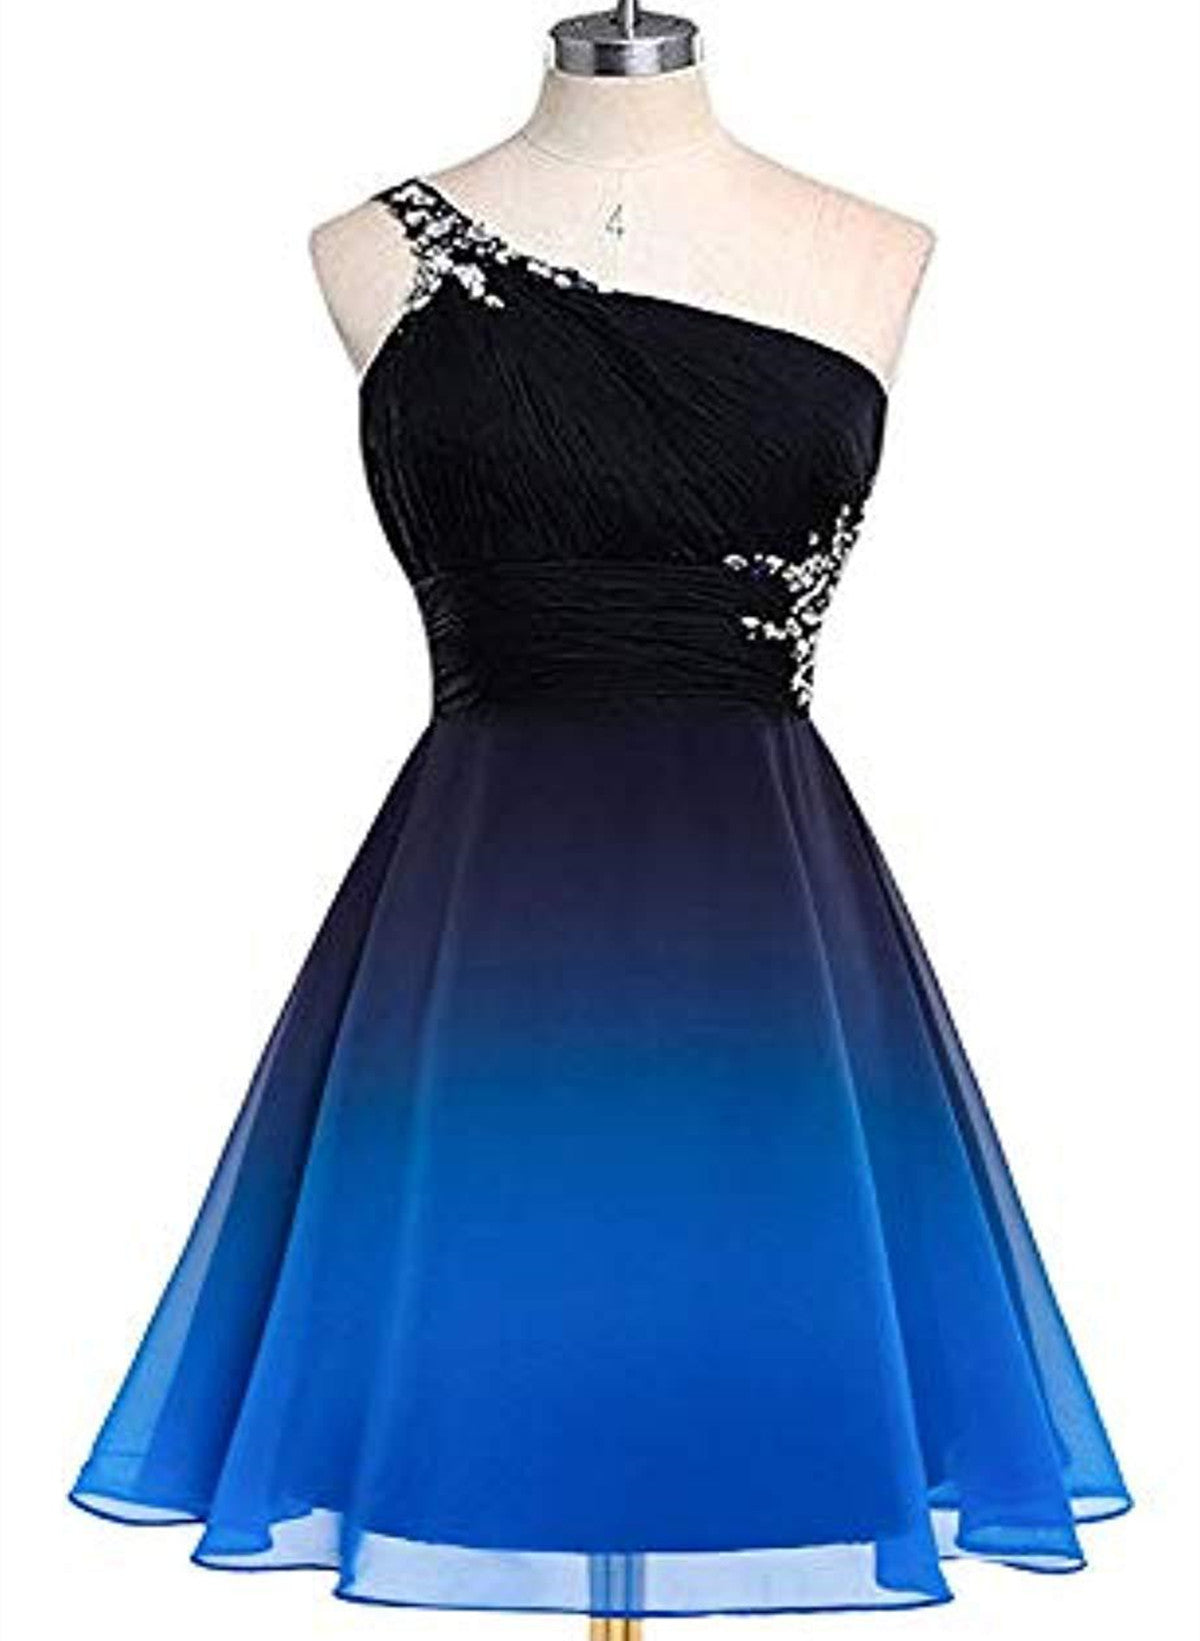 Black and Blue Gradient Chiffon Beaded Party Dress Outfits For Girls, A-line Chiffon Homecoming Dress